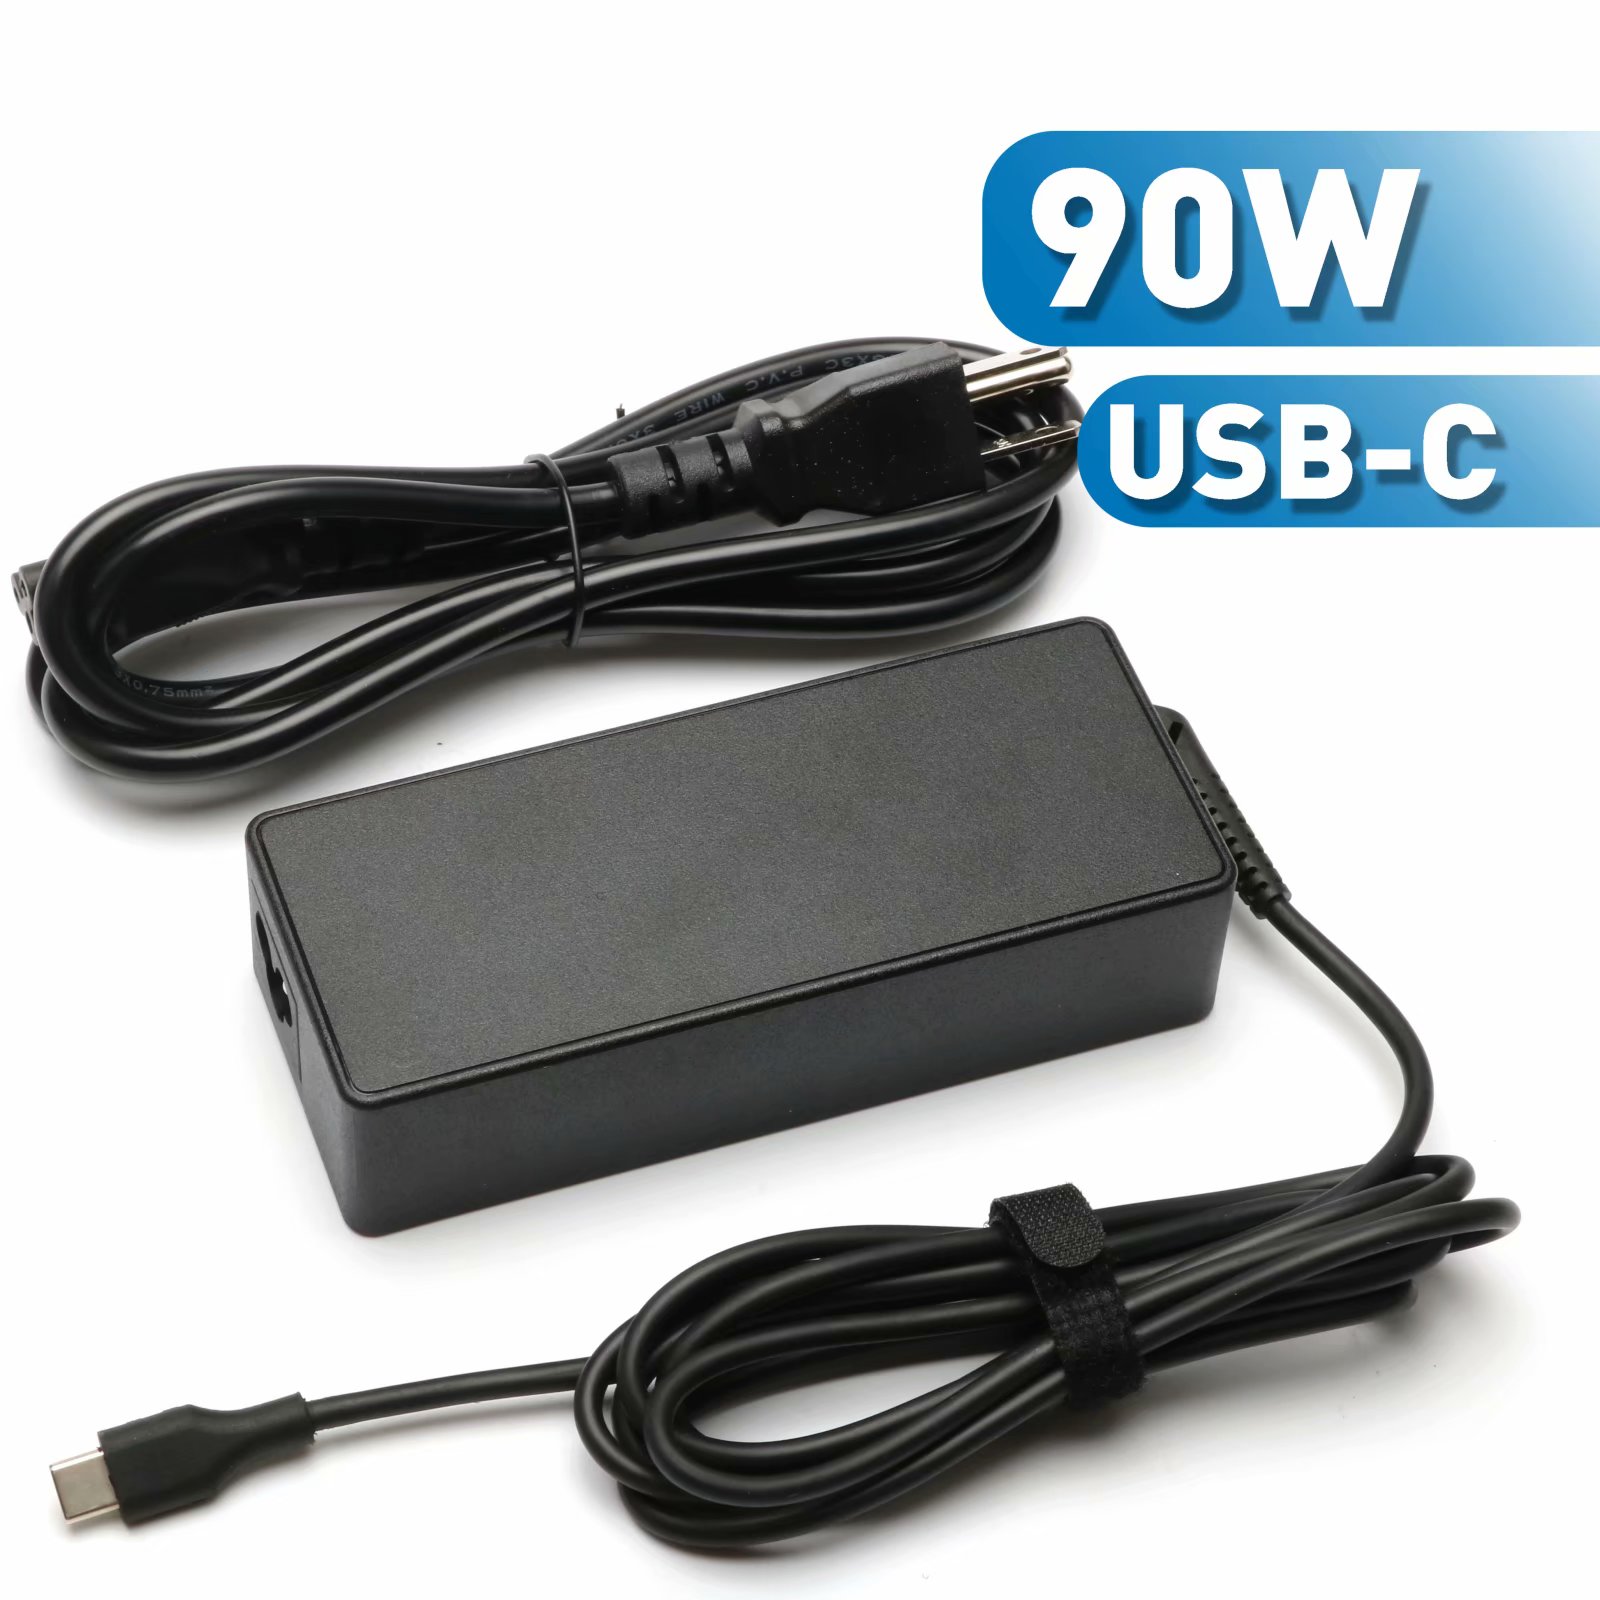 90W 20V 4.5A USB C Type-C Charger Power Adapter for HP Spectre x360 13 TPN-CA01 N8N14AA#ABL Acer Travelmate B1 Lenovo Yoga 720 910 ThinkPad X1 Yoga5 Pro DELL XPS12 XPS13 - image 1 of 10